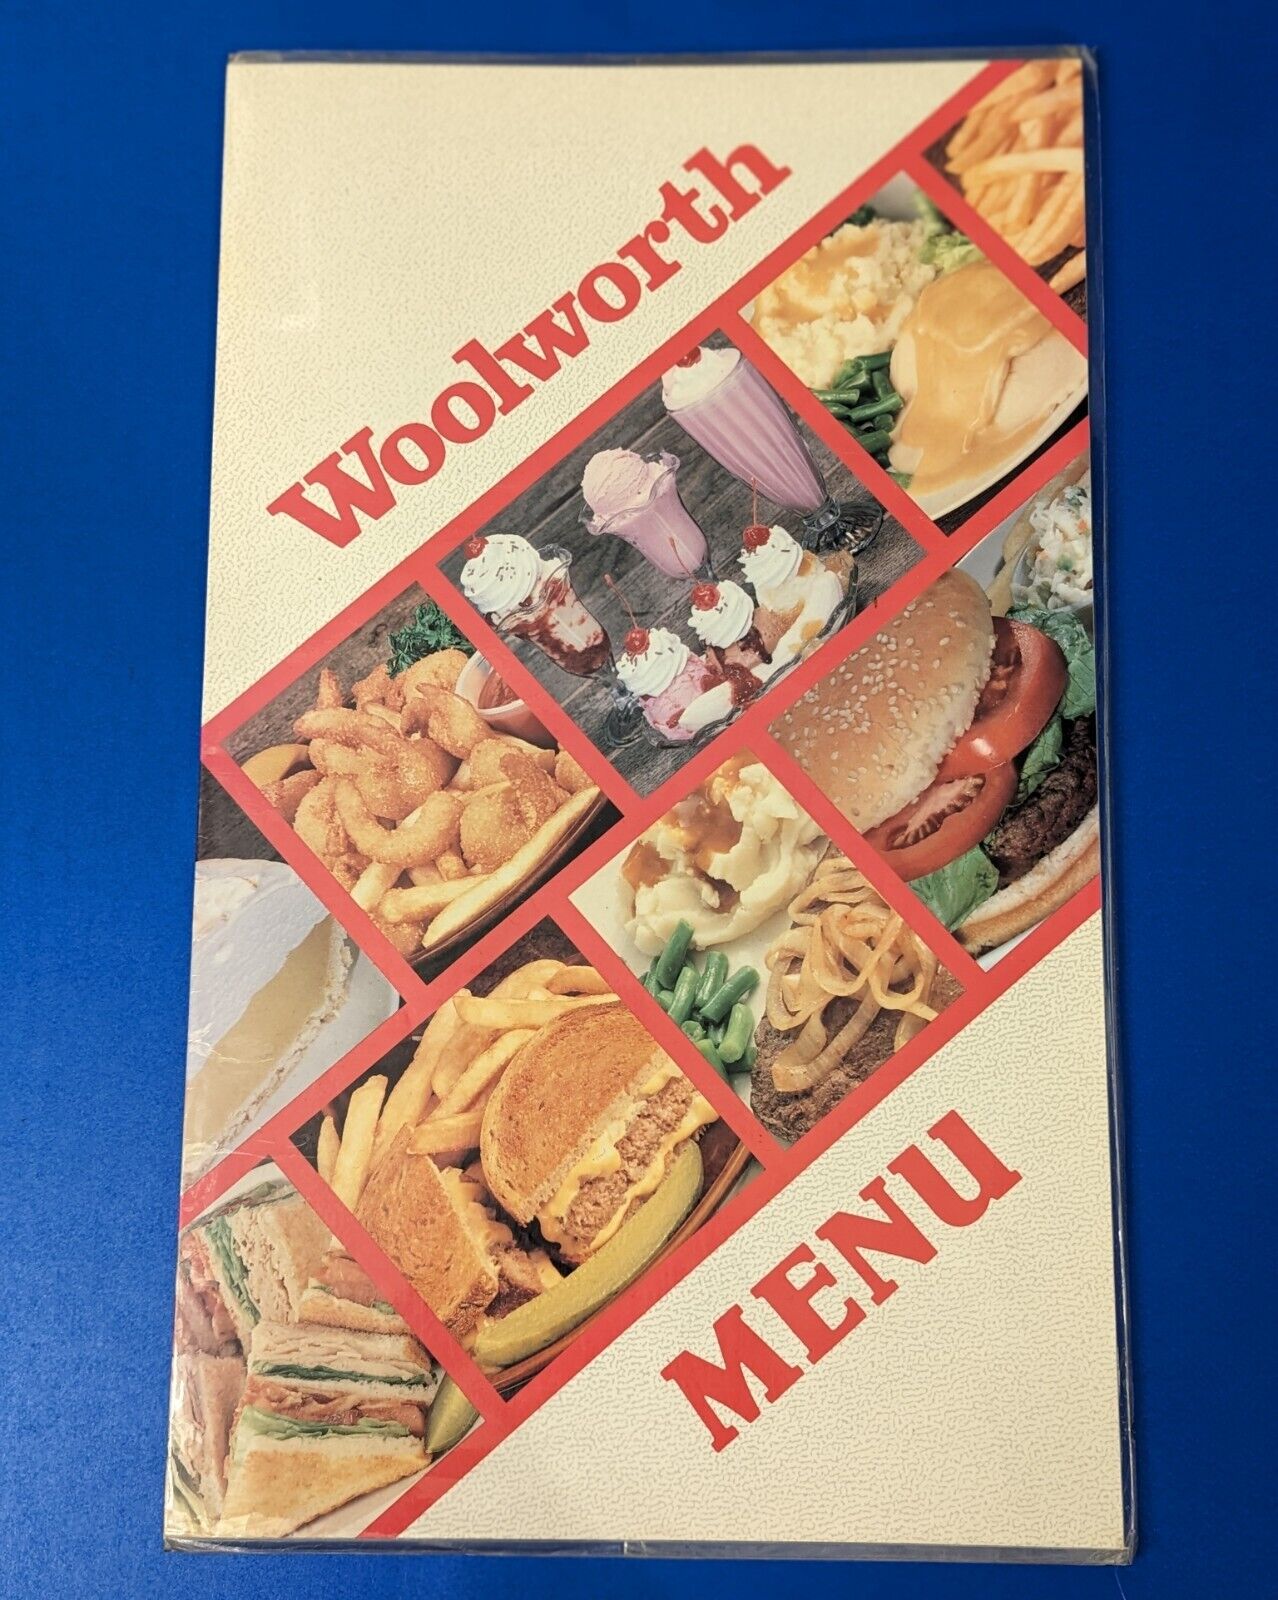 VTG Woolworth Menu - RARE Original Early 1990s Laminated Breakfast Lunch Counter